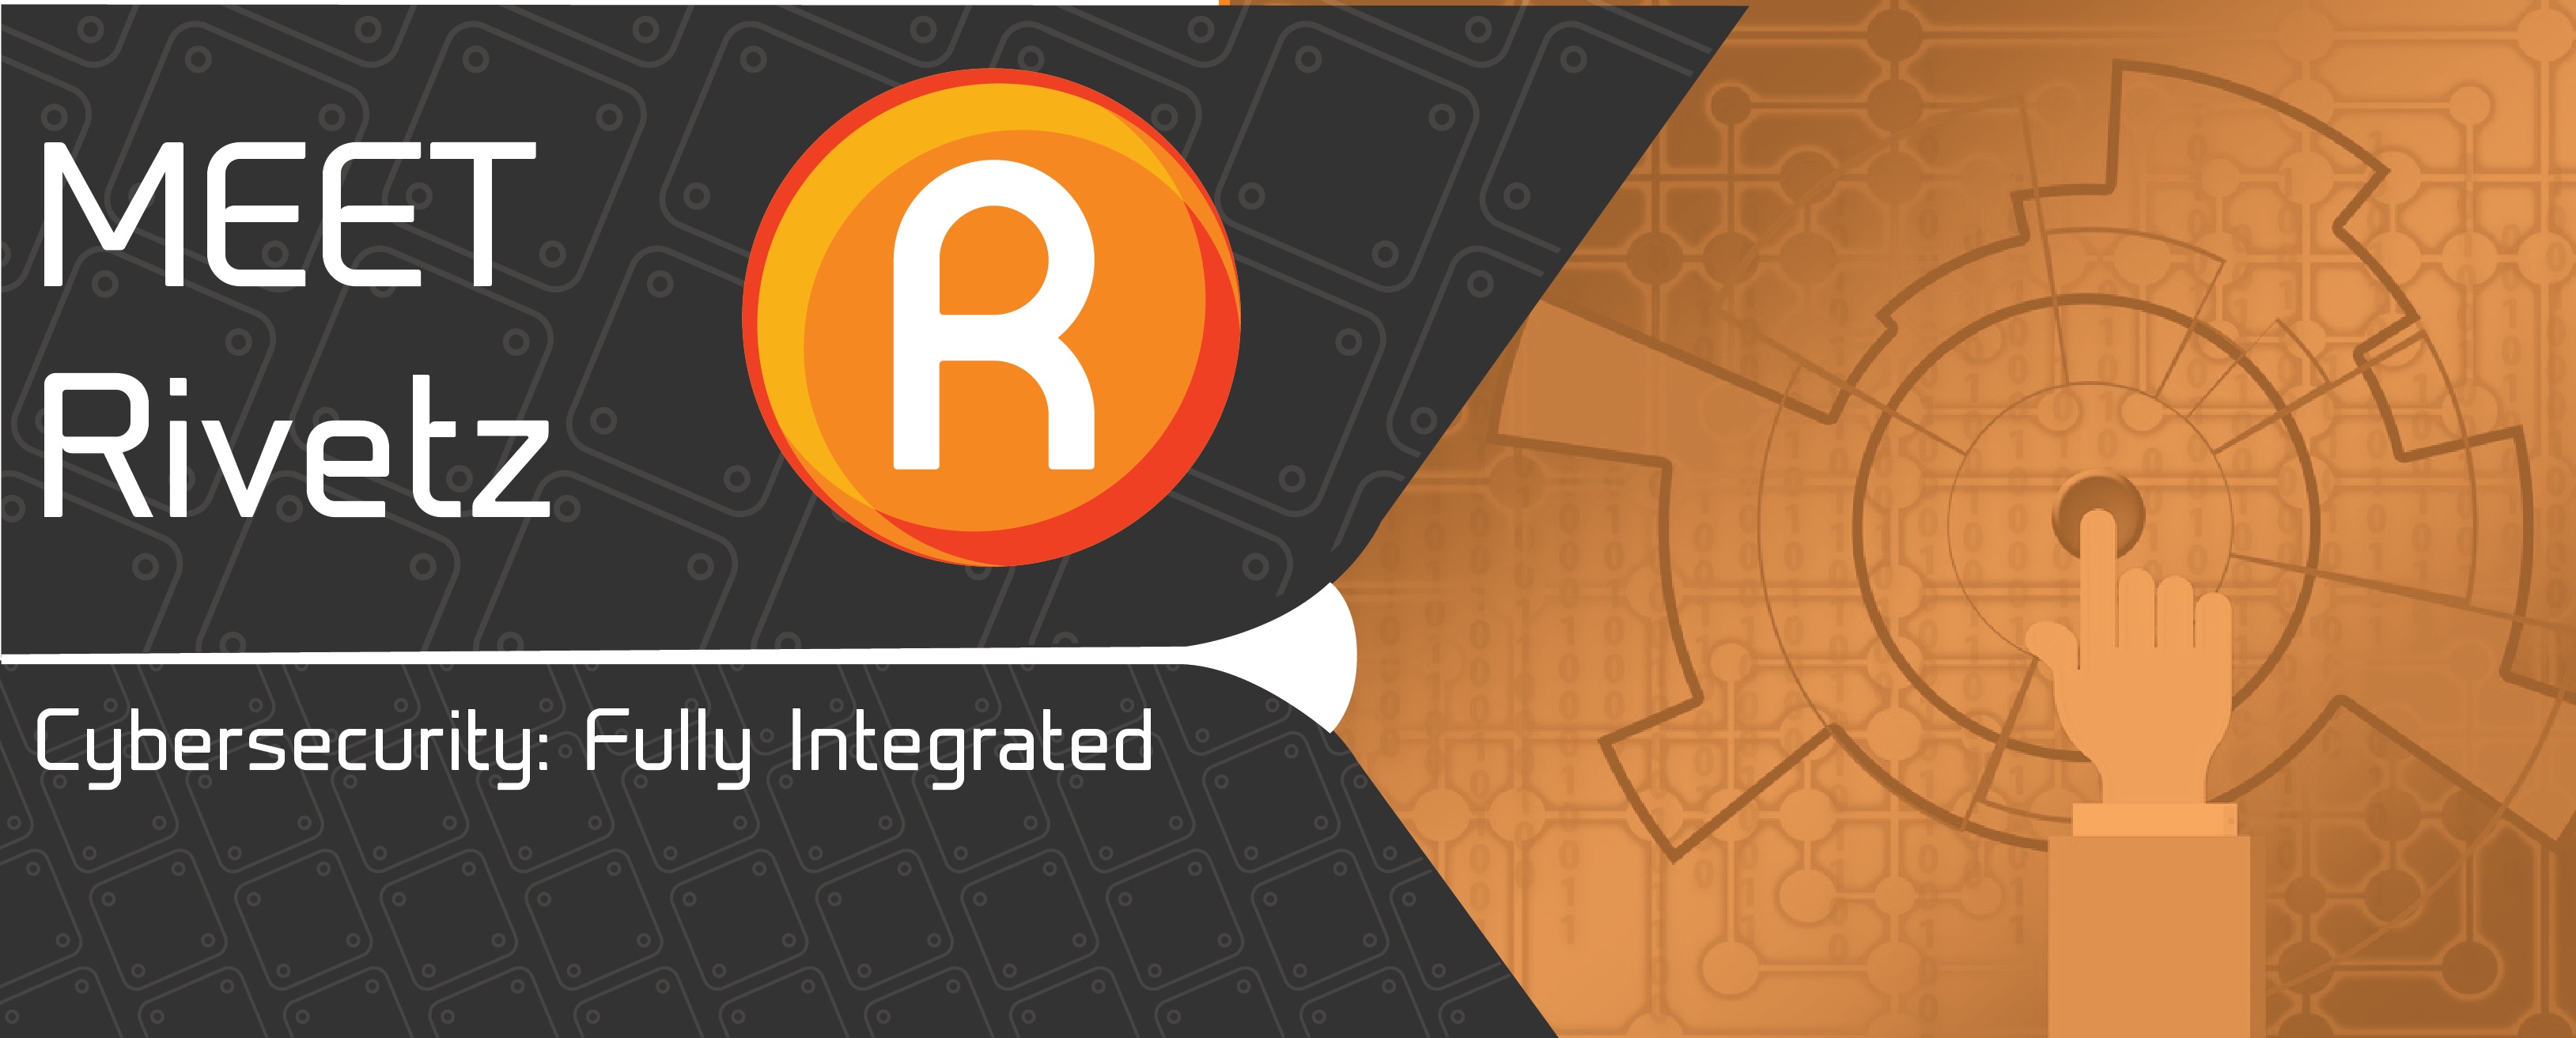 Rivetz Introduces Decentralized Cybersecurity Token to Secure Devices